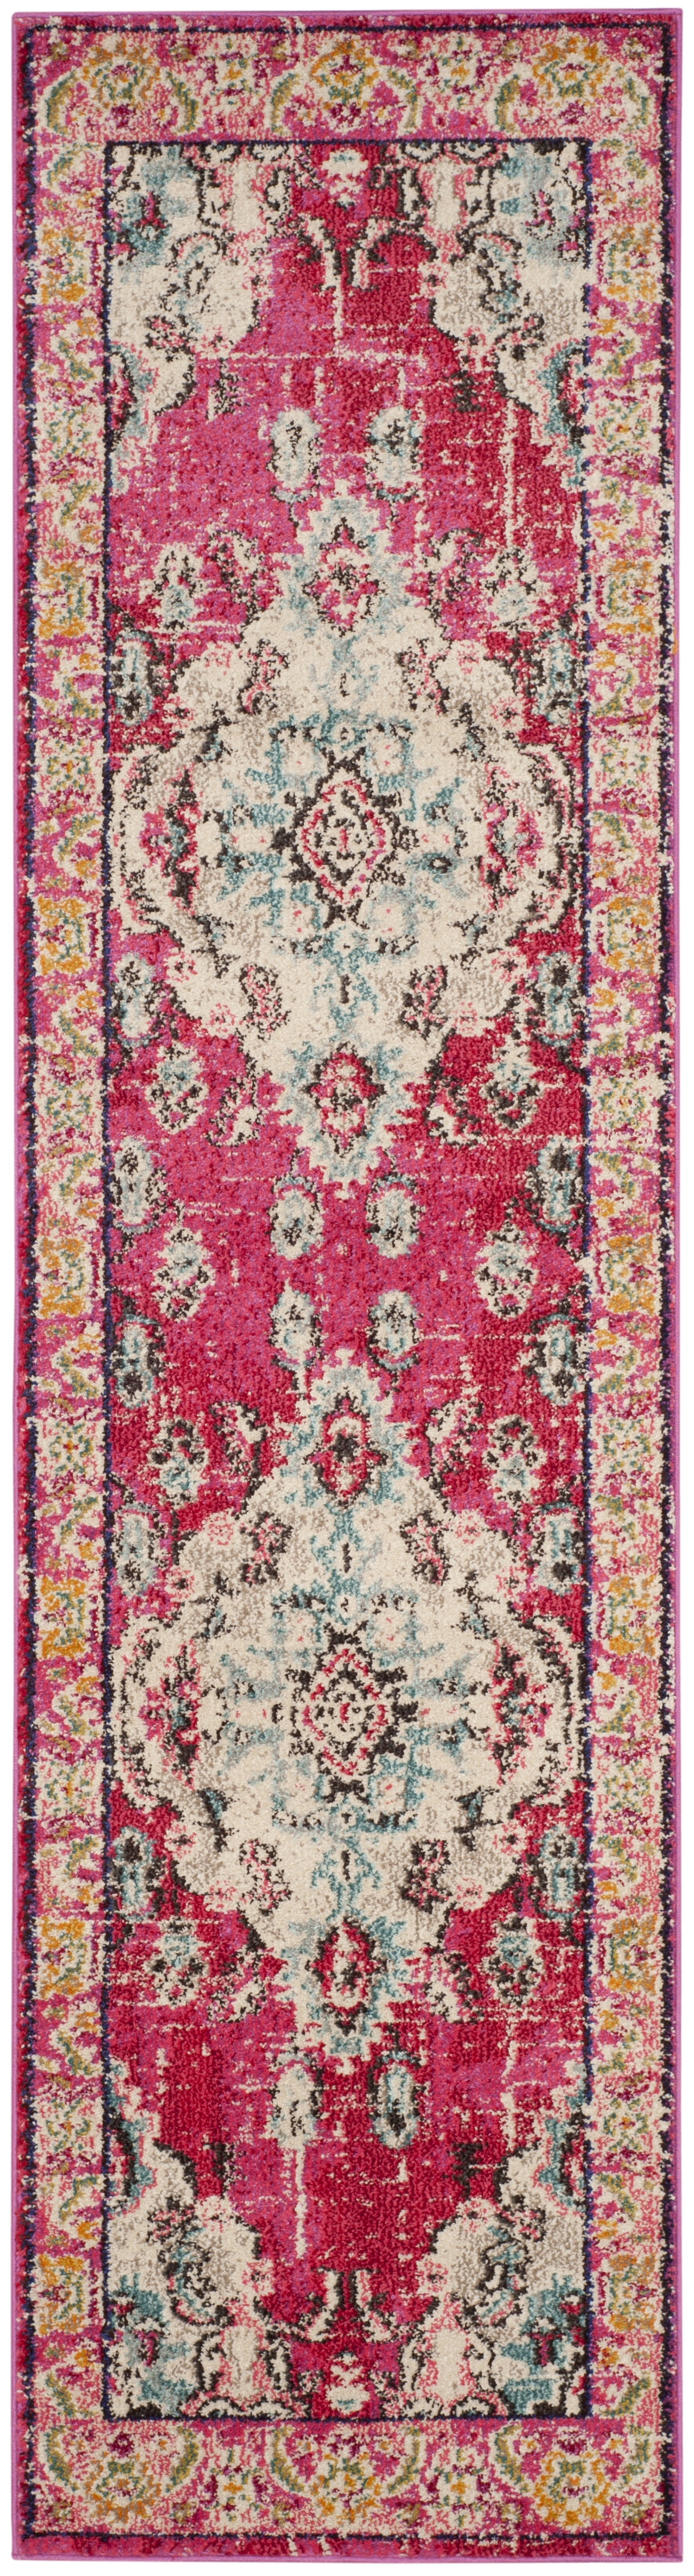 Arlo Home Woven Area Rug, MNC243D, Pink/Multi,  2' 2" X 6' - Image 0